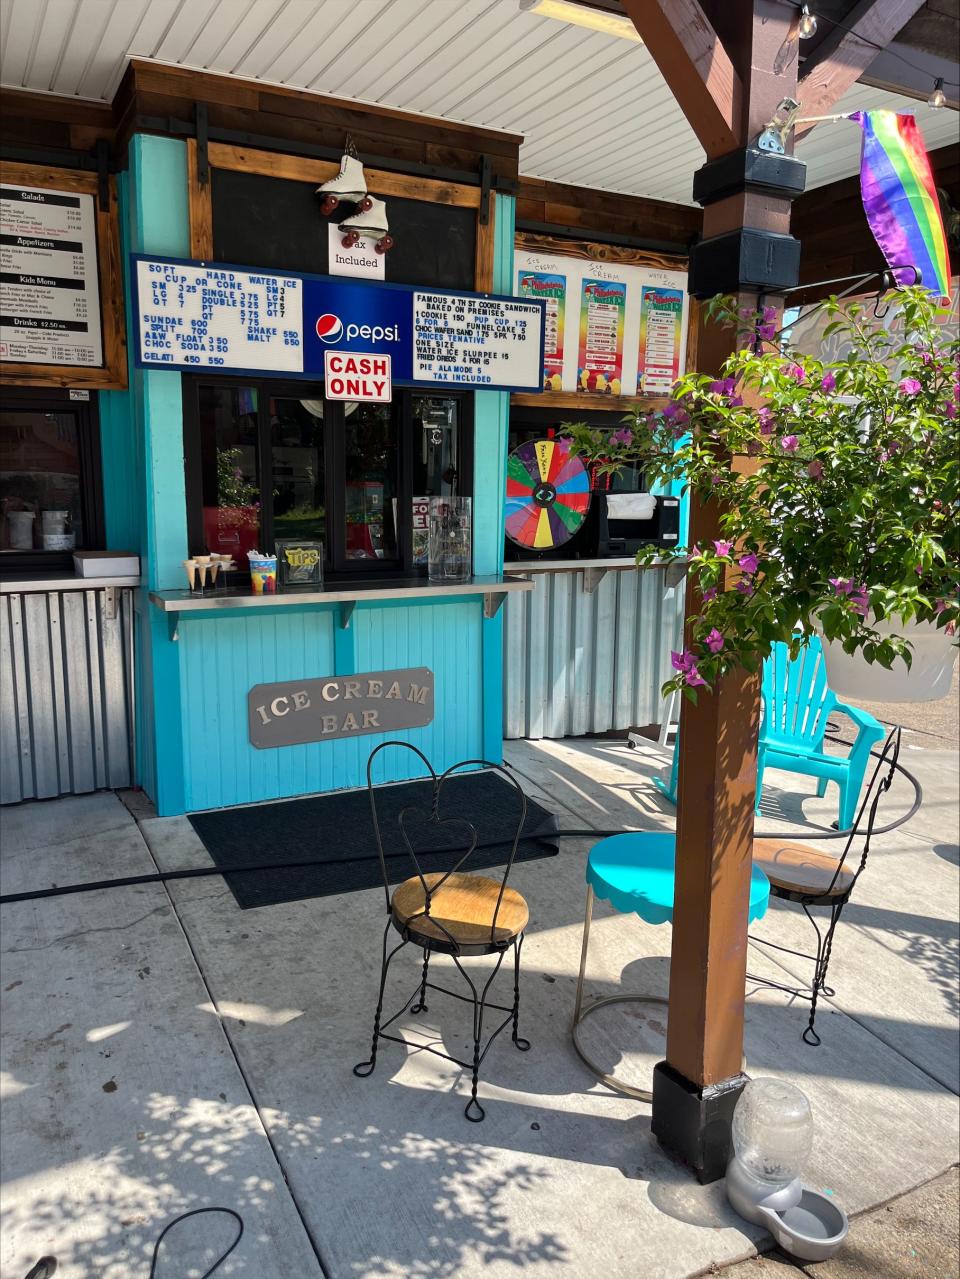 Weakend at Bernie's, a new ice cream shop and cheesesteak stand opened in Bristol Borough.